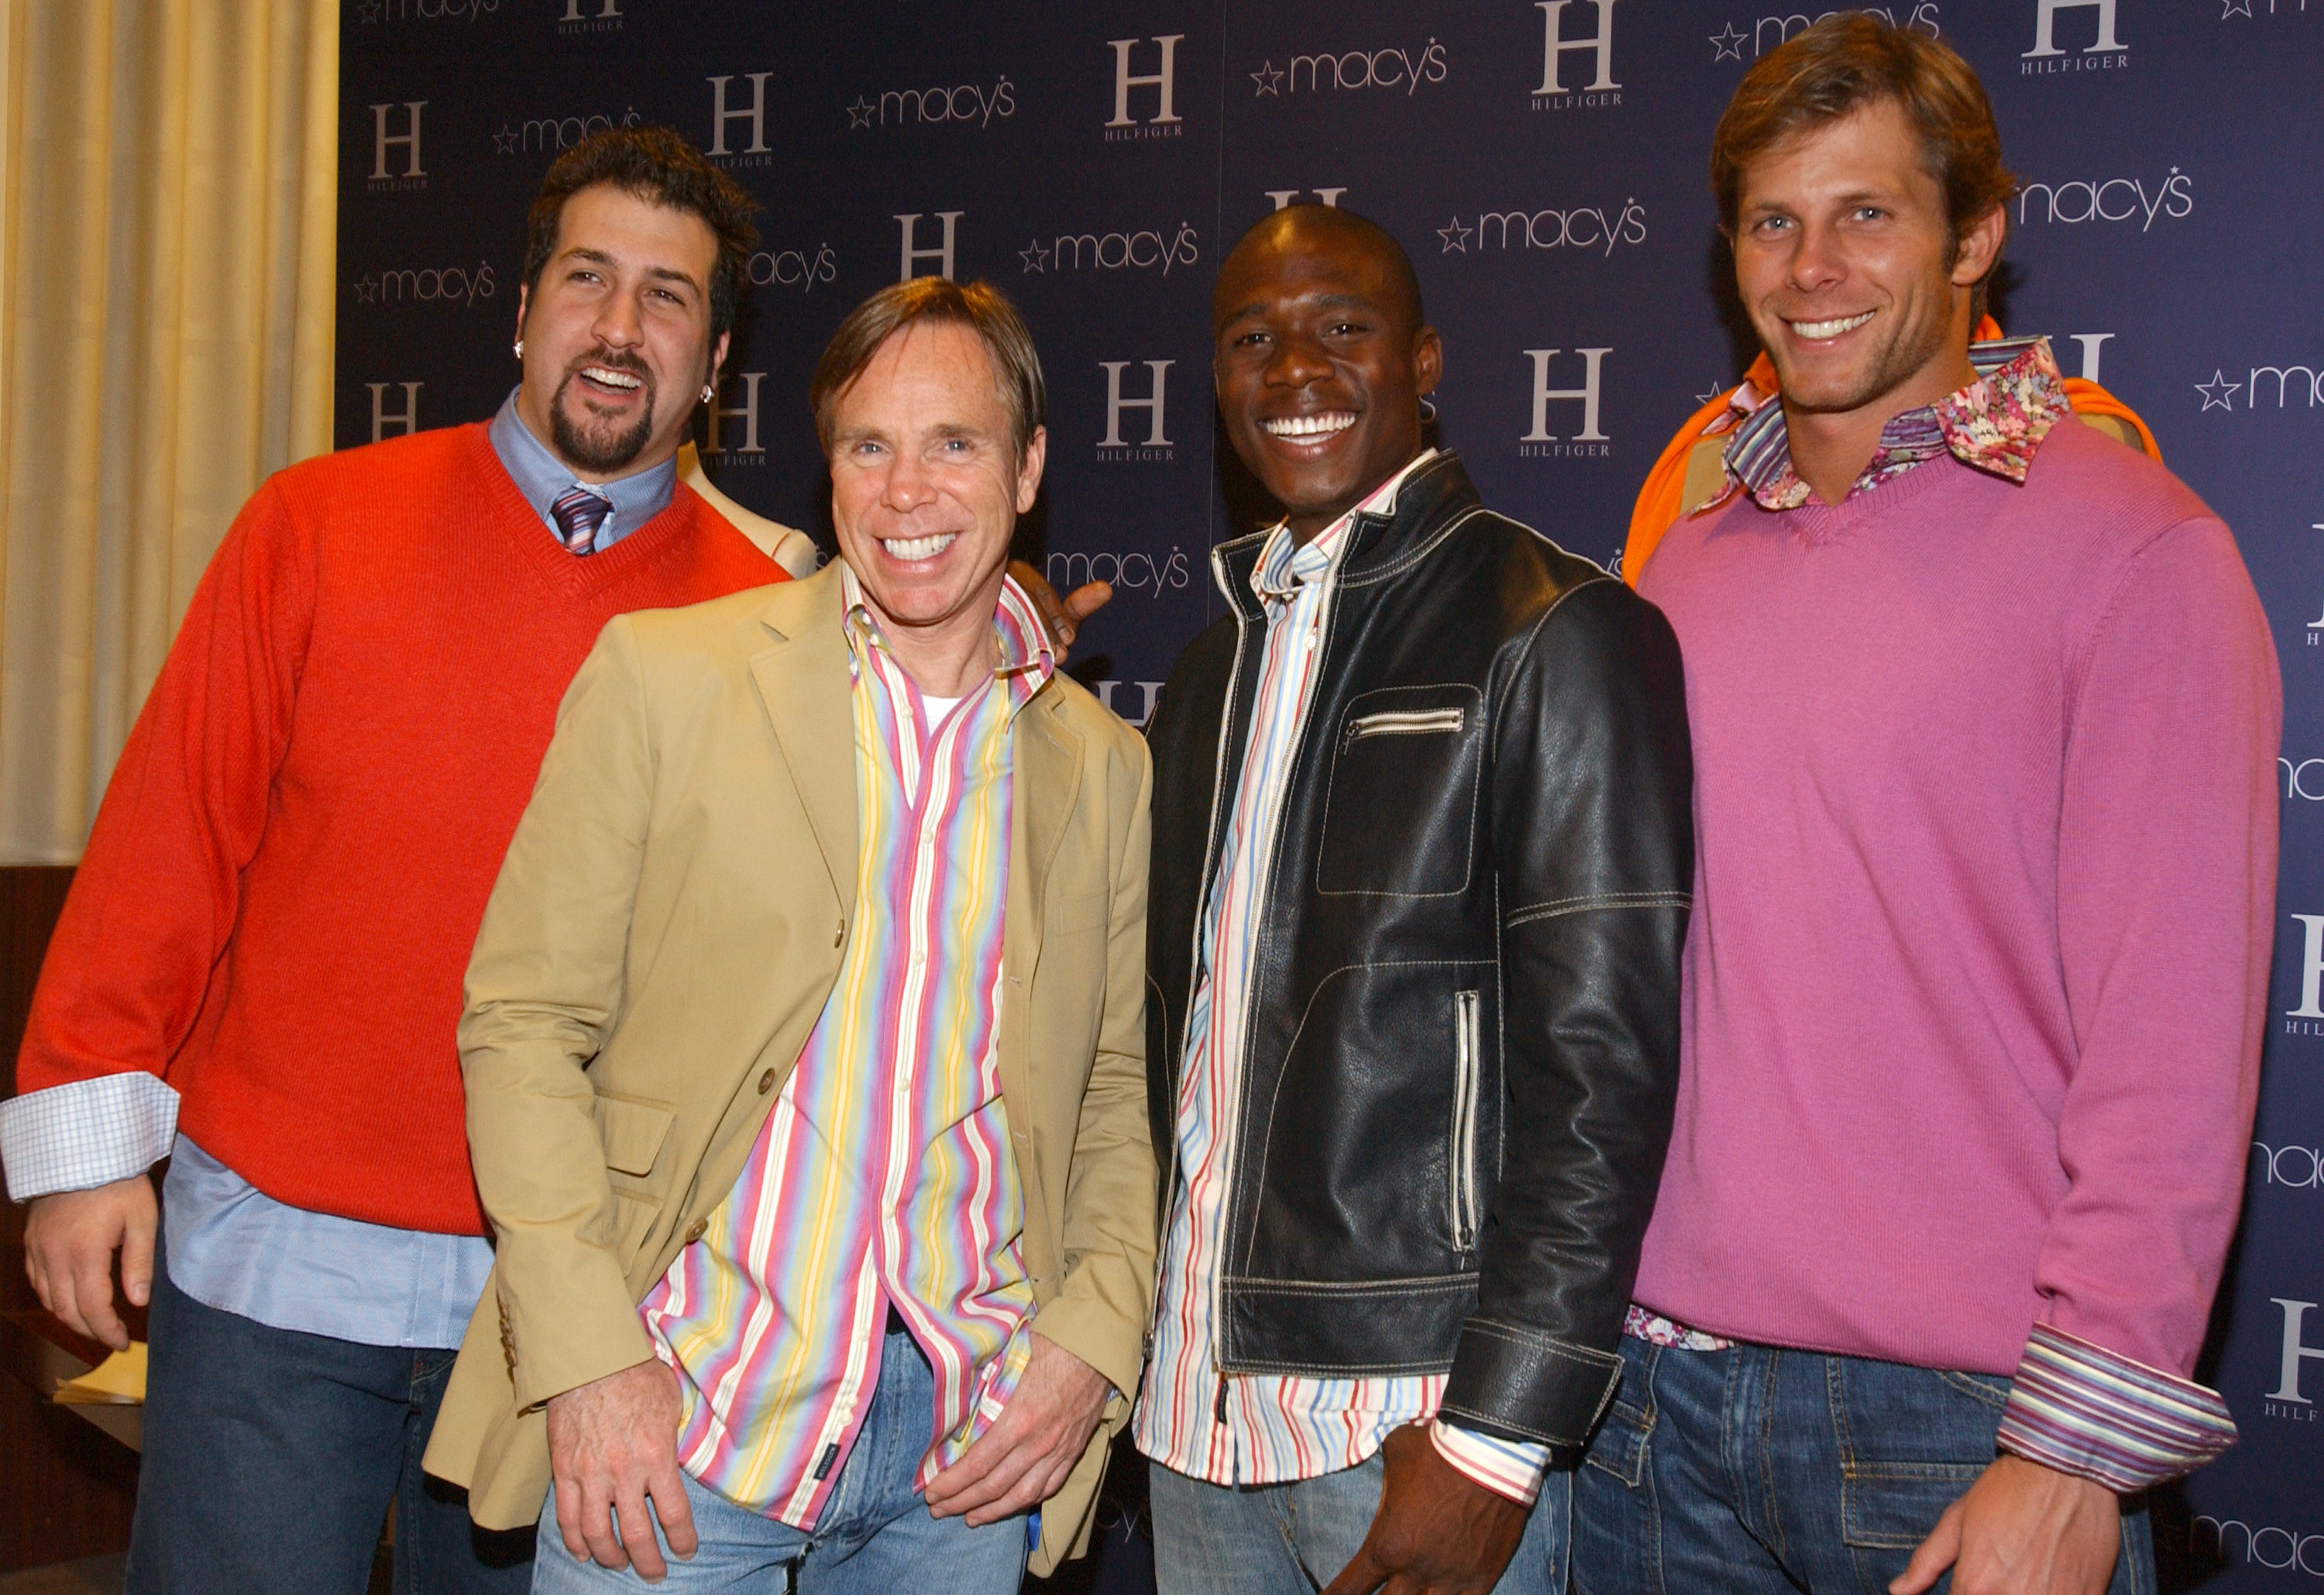 Joey Fatone, Tommy Hilfiger, Alton Williams and Ian McKee wearing "H" Hilfiger Spring 2004